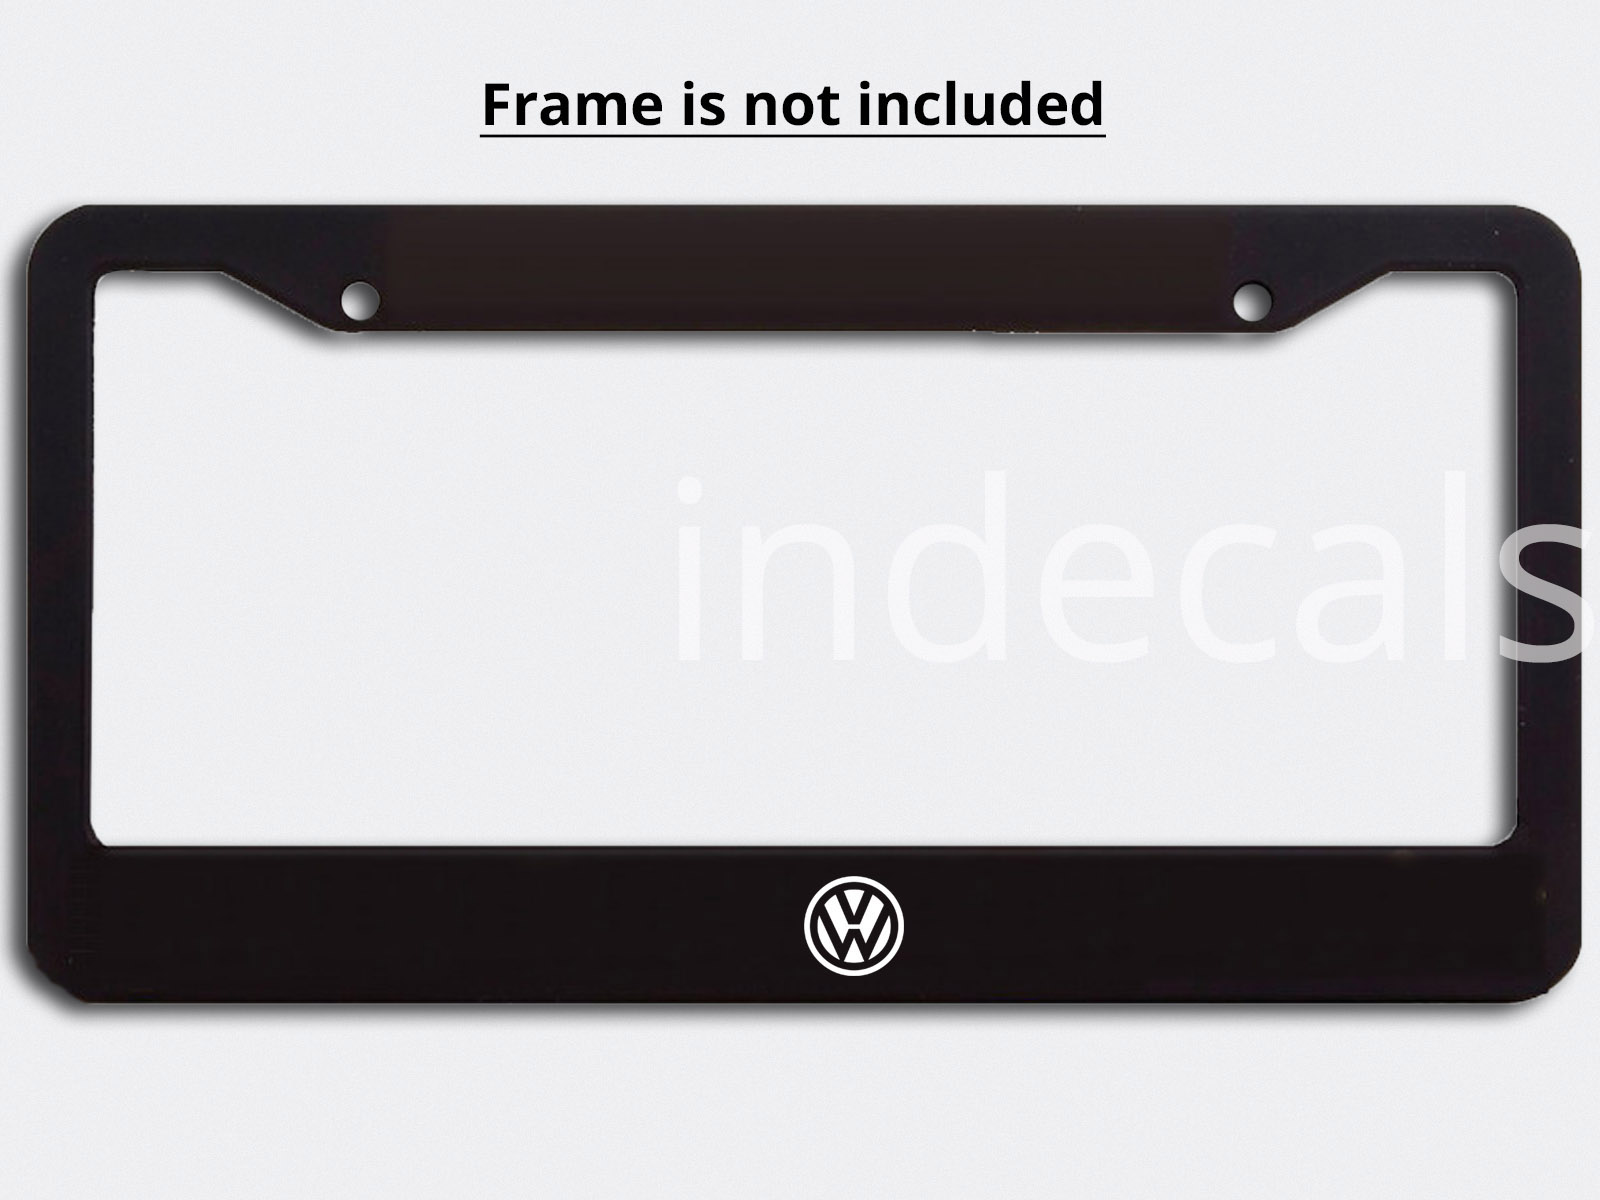 3 x Volkswagen Stickers for License Plate Frame - White